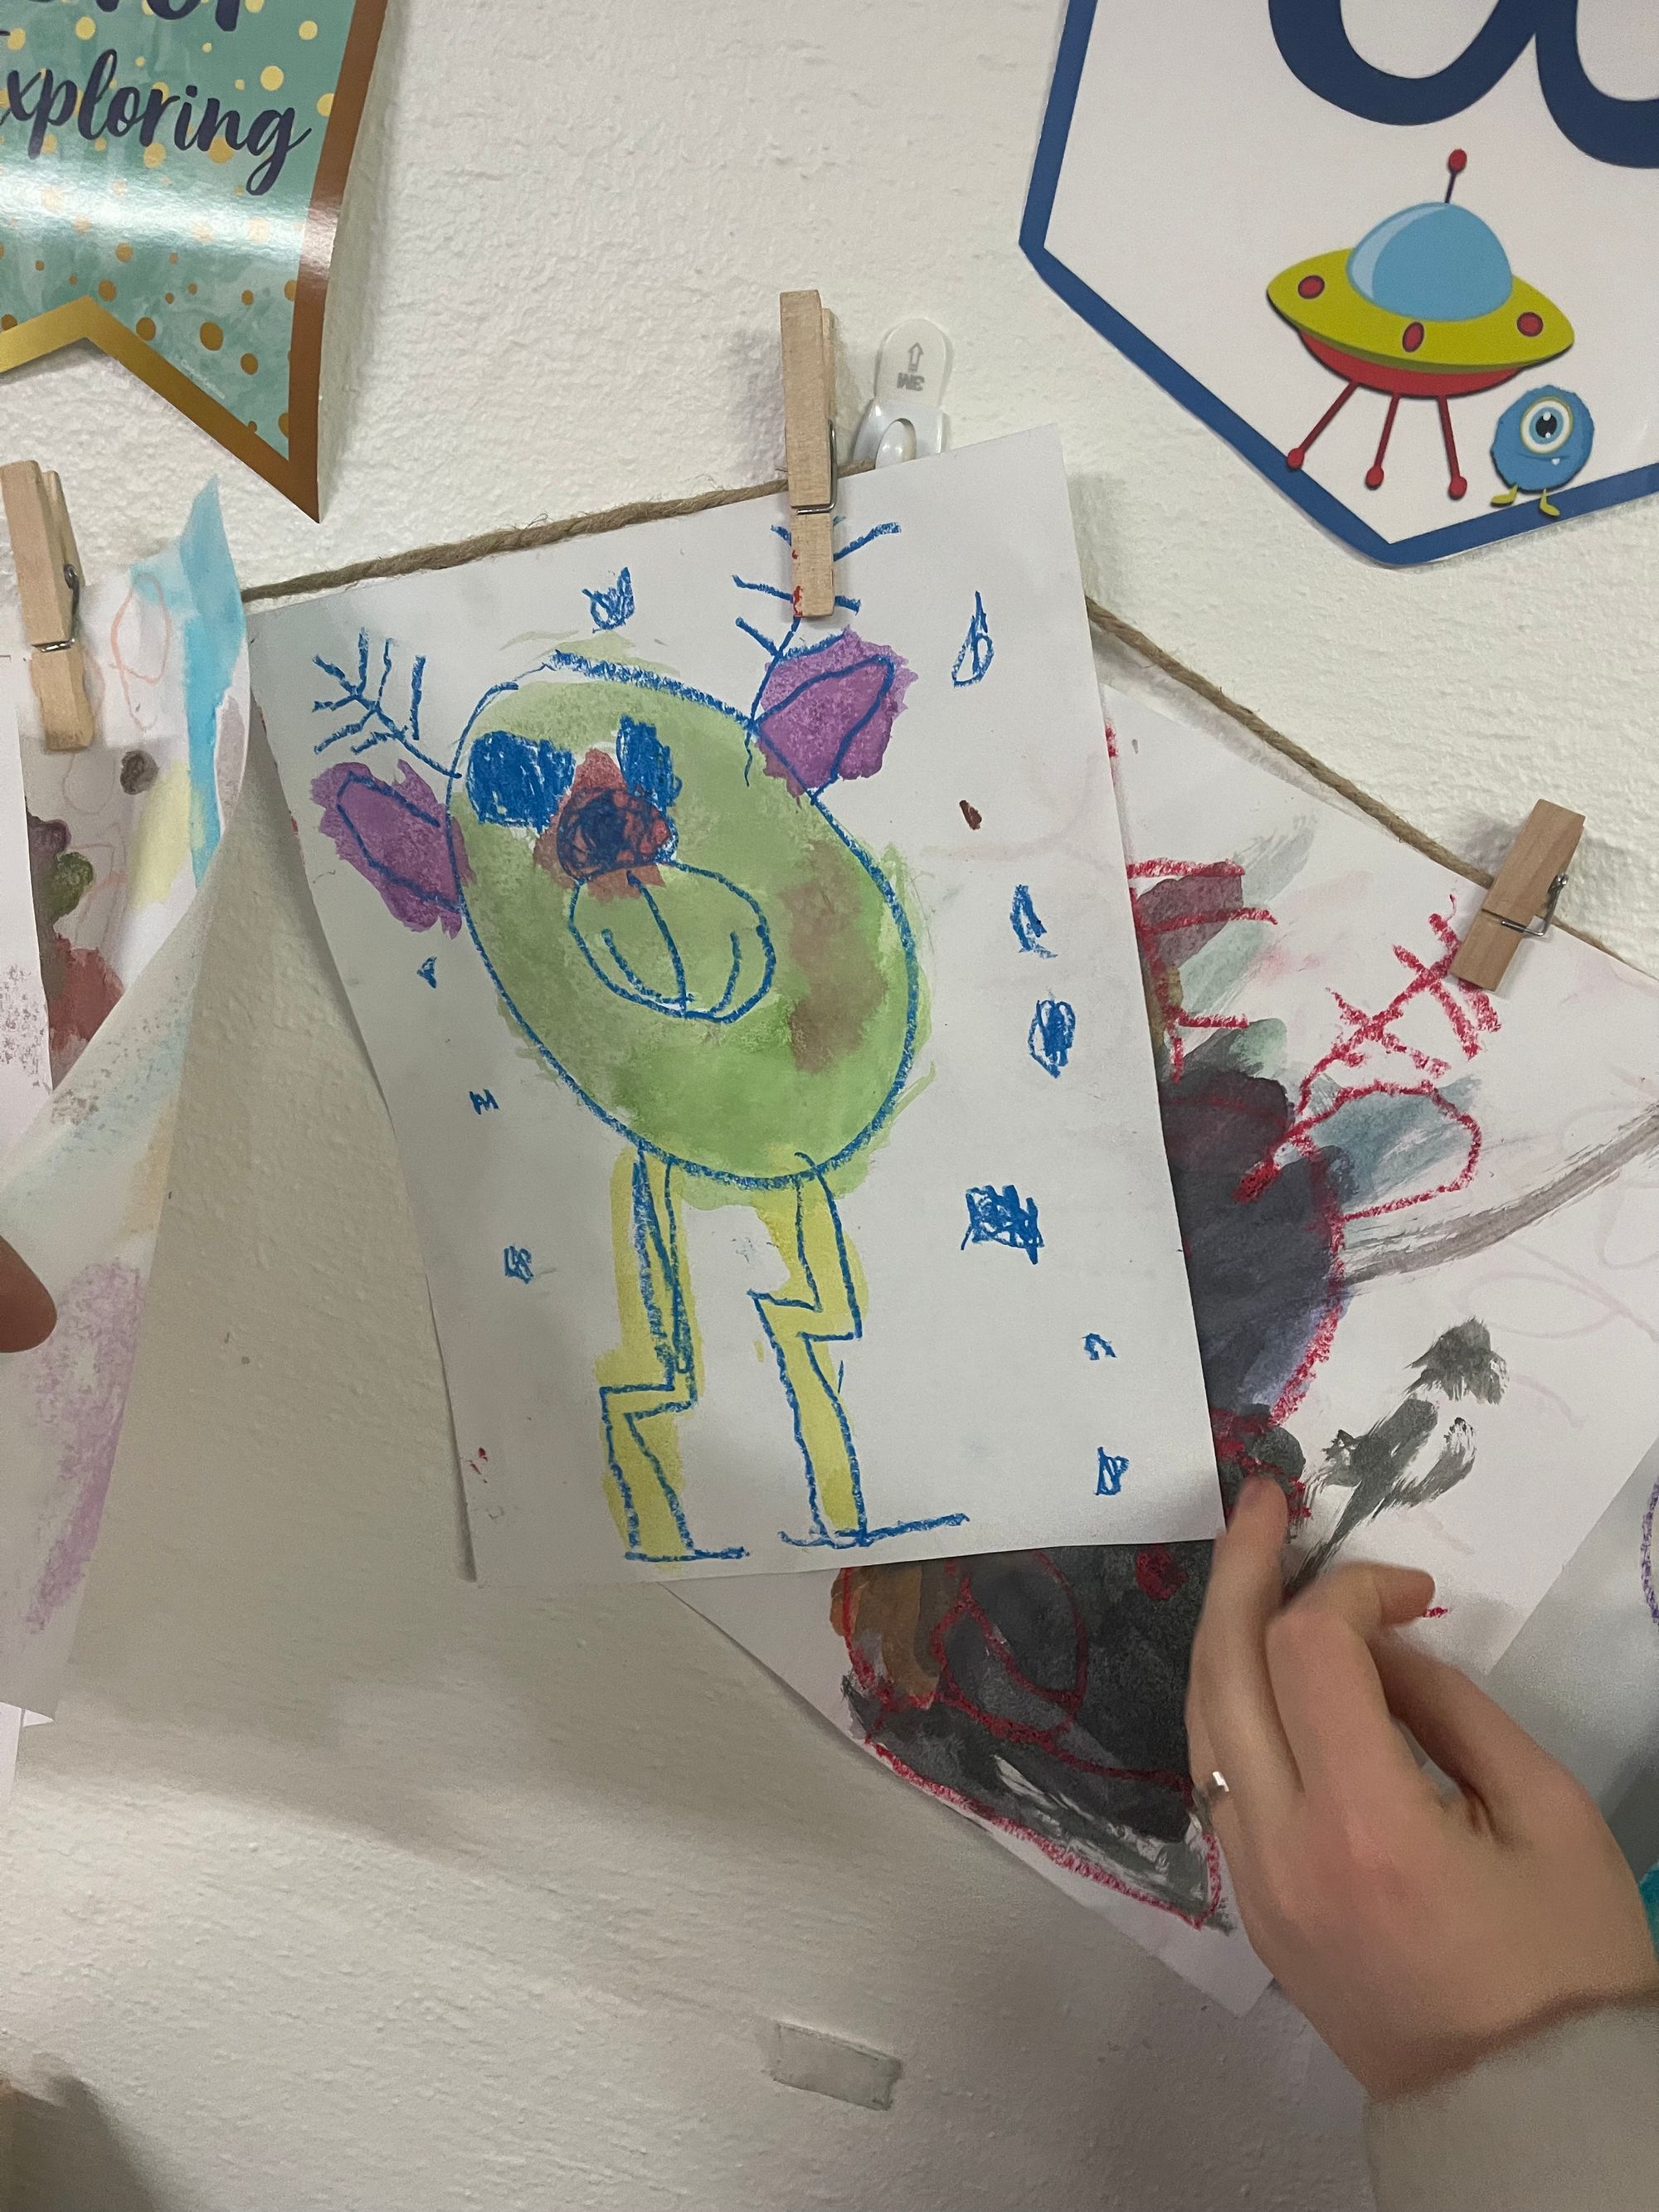 A child's drawing that looks kind of like a green monster